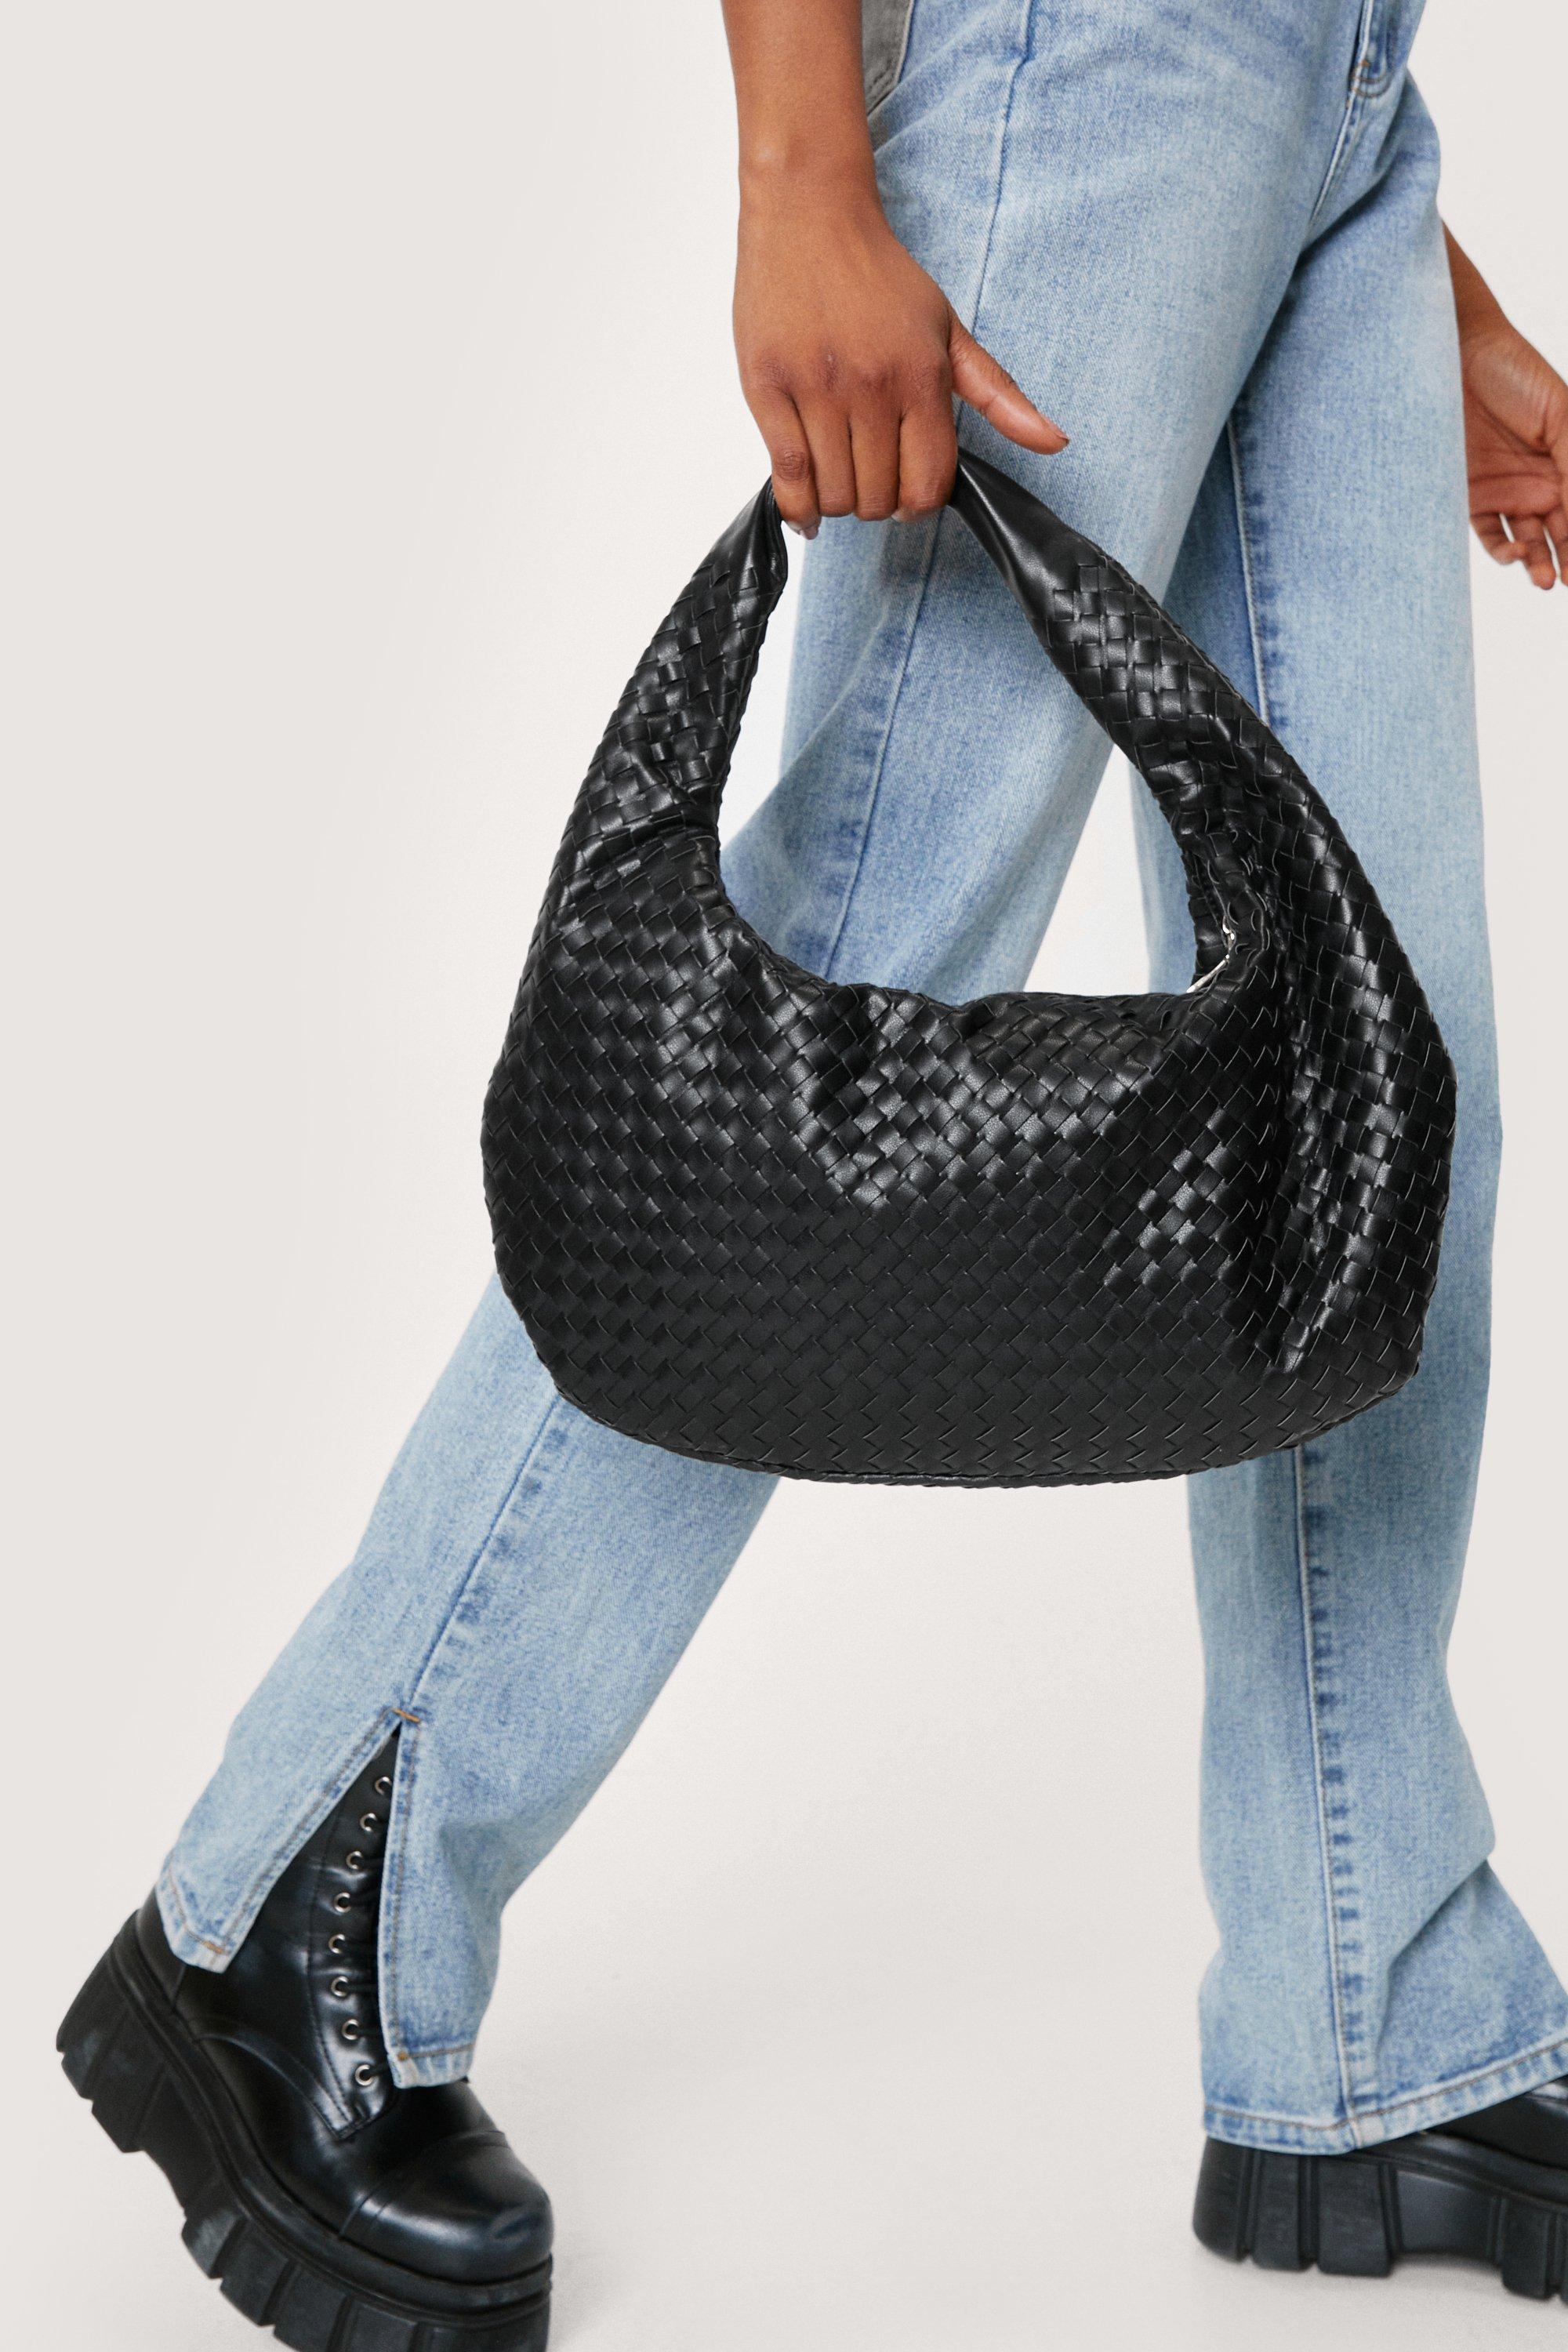 Slouchy Woven Look Clutch